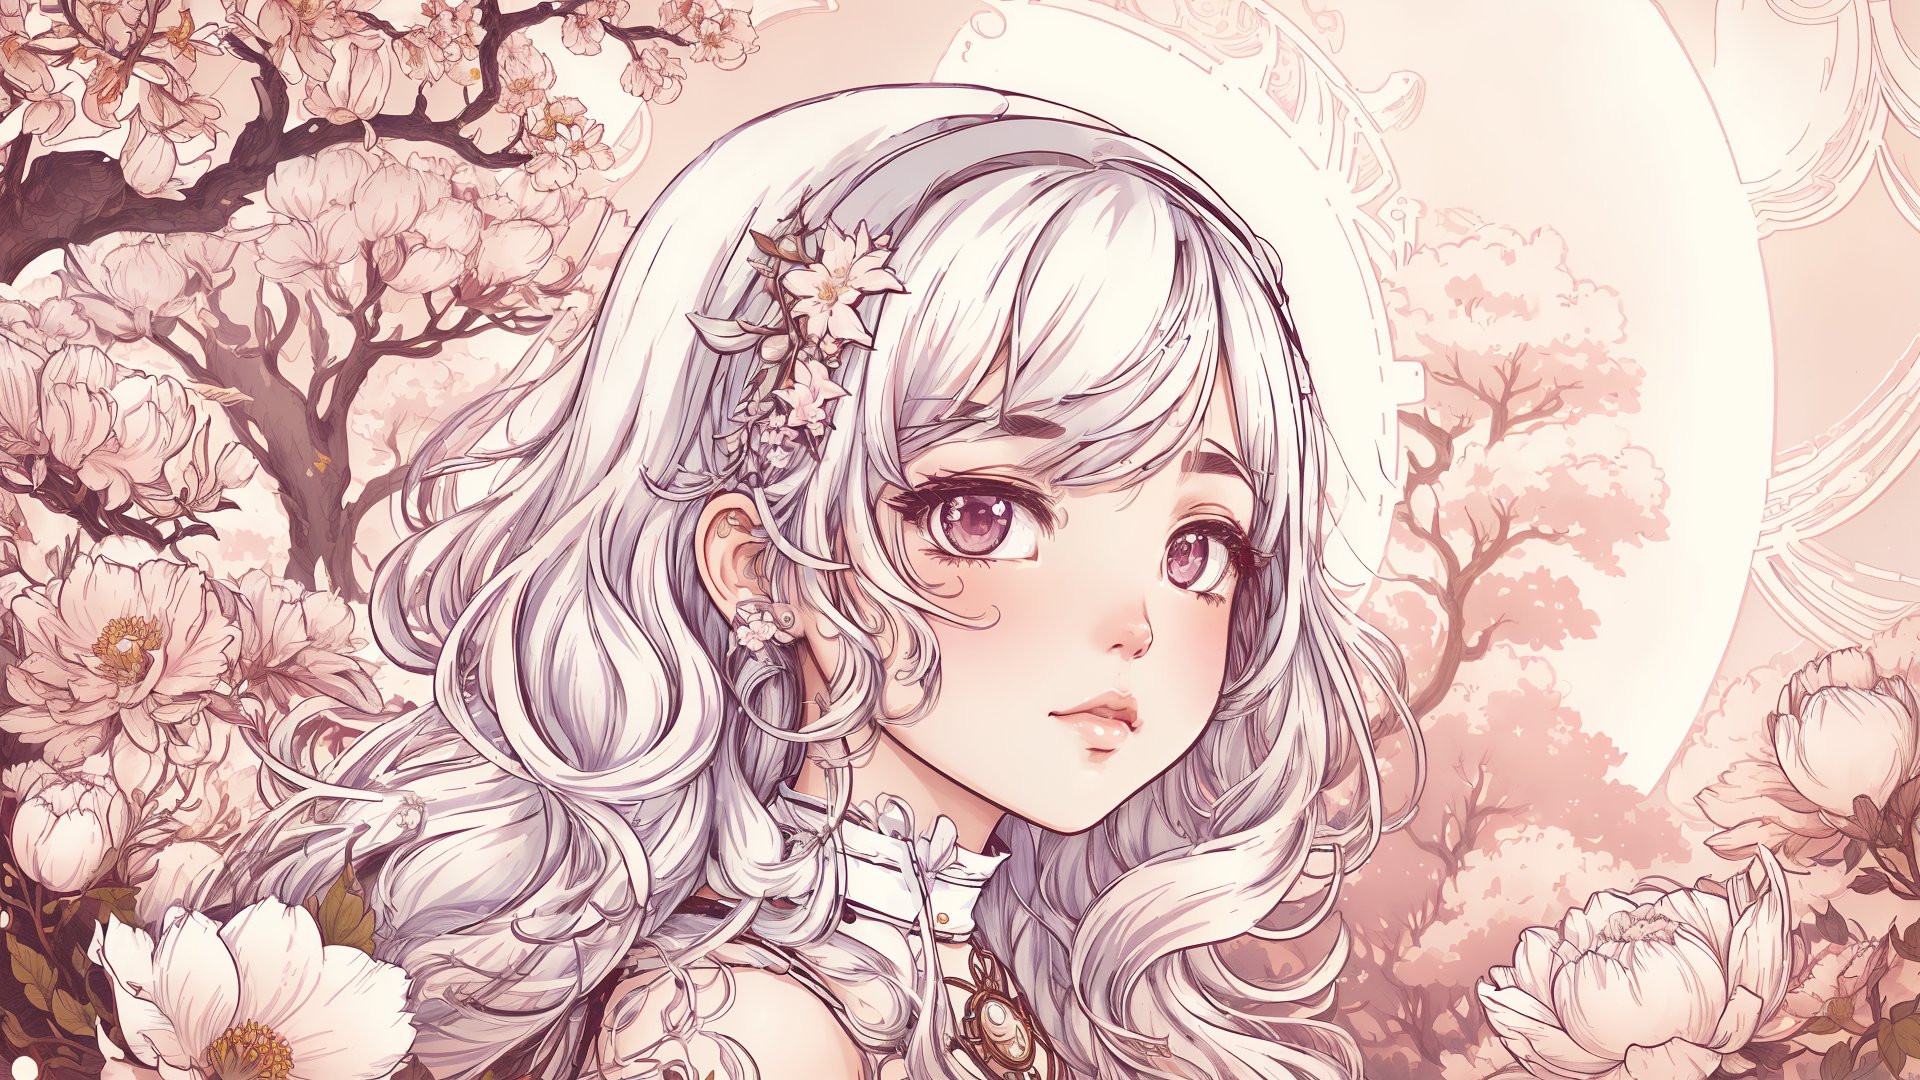 illustration of an adorable chibi girl , white hair , depth of field ,  textured, trees , flowers , branch, full moon , detailed figure ,xewx drawing style , artdeco, art nouveau ,